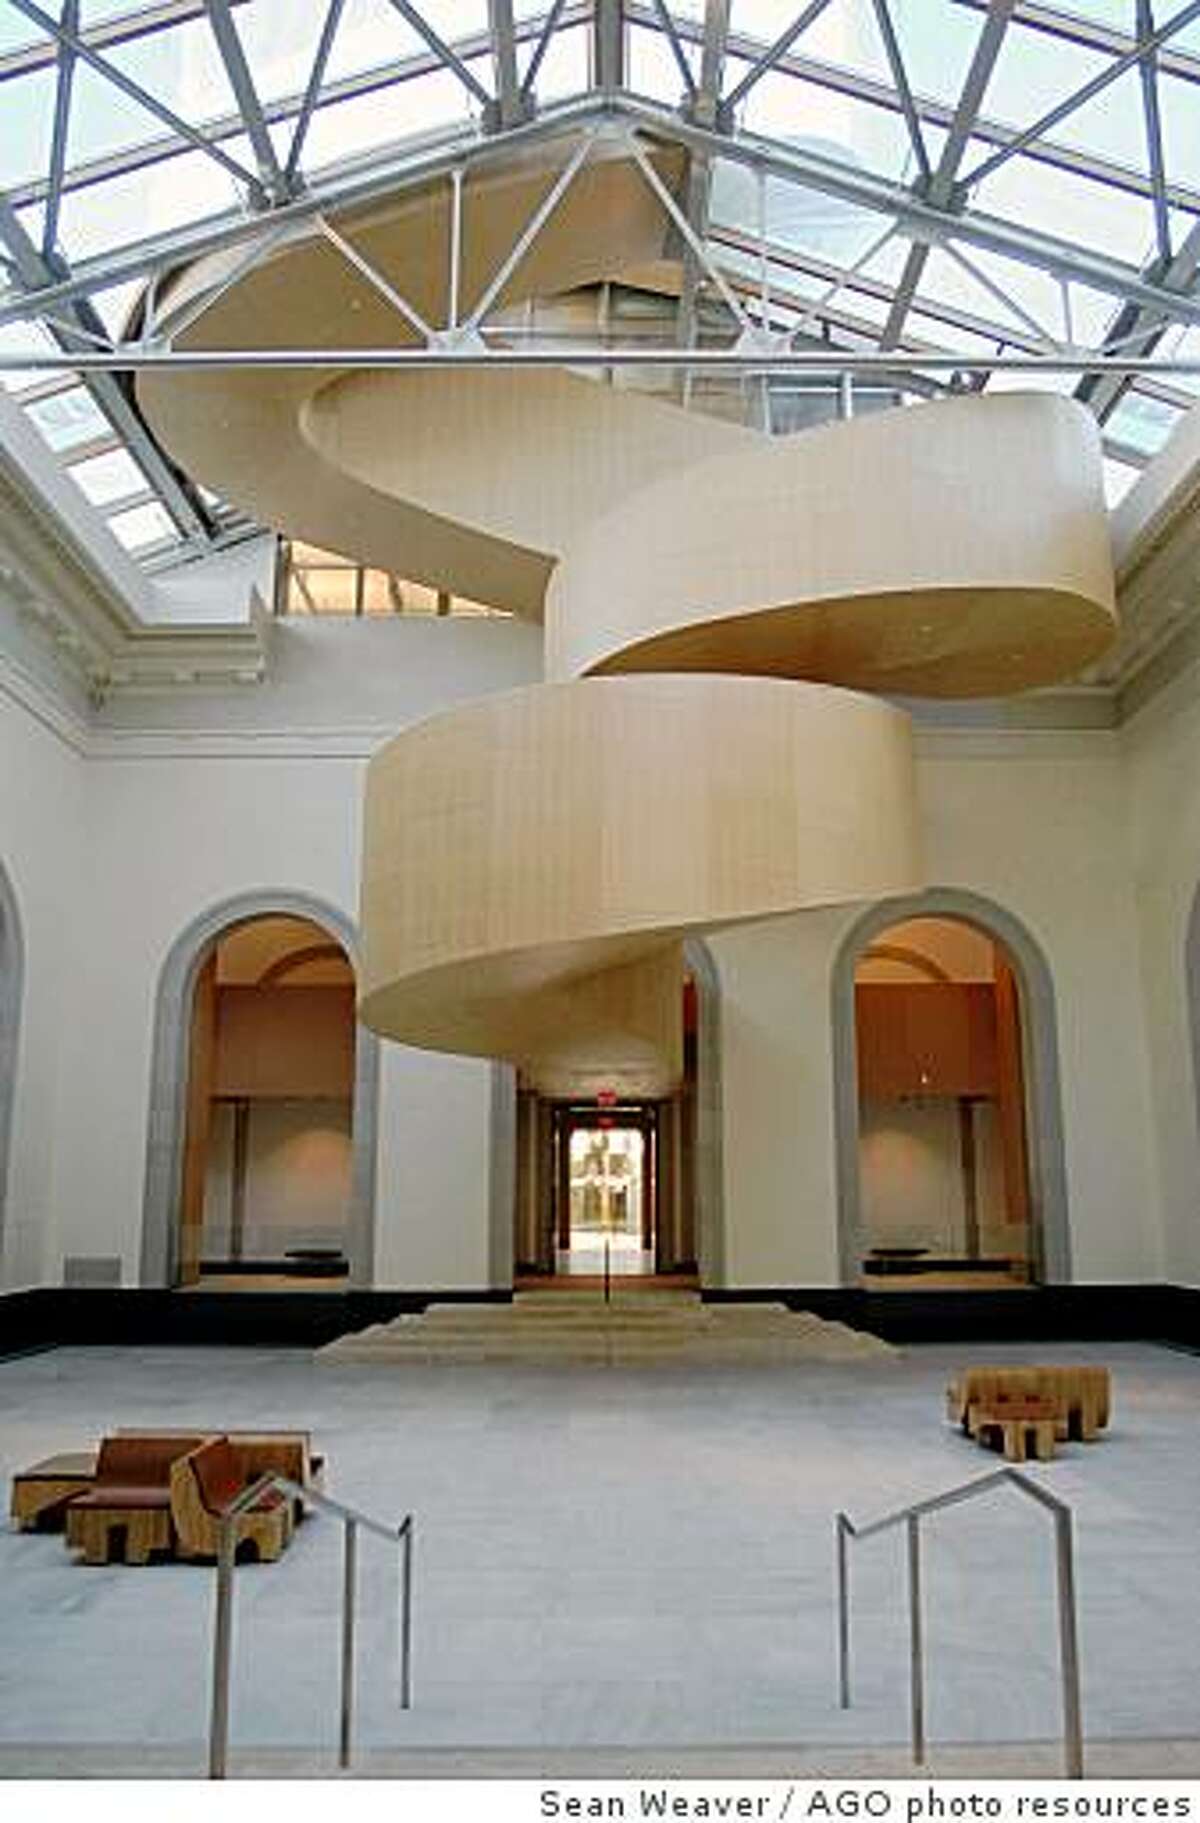 The spiral staircase connecting the existing grand courtyard with his contemporary art extension at the south side of the building. of the museum.